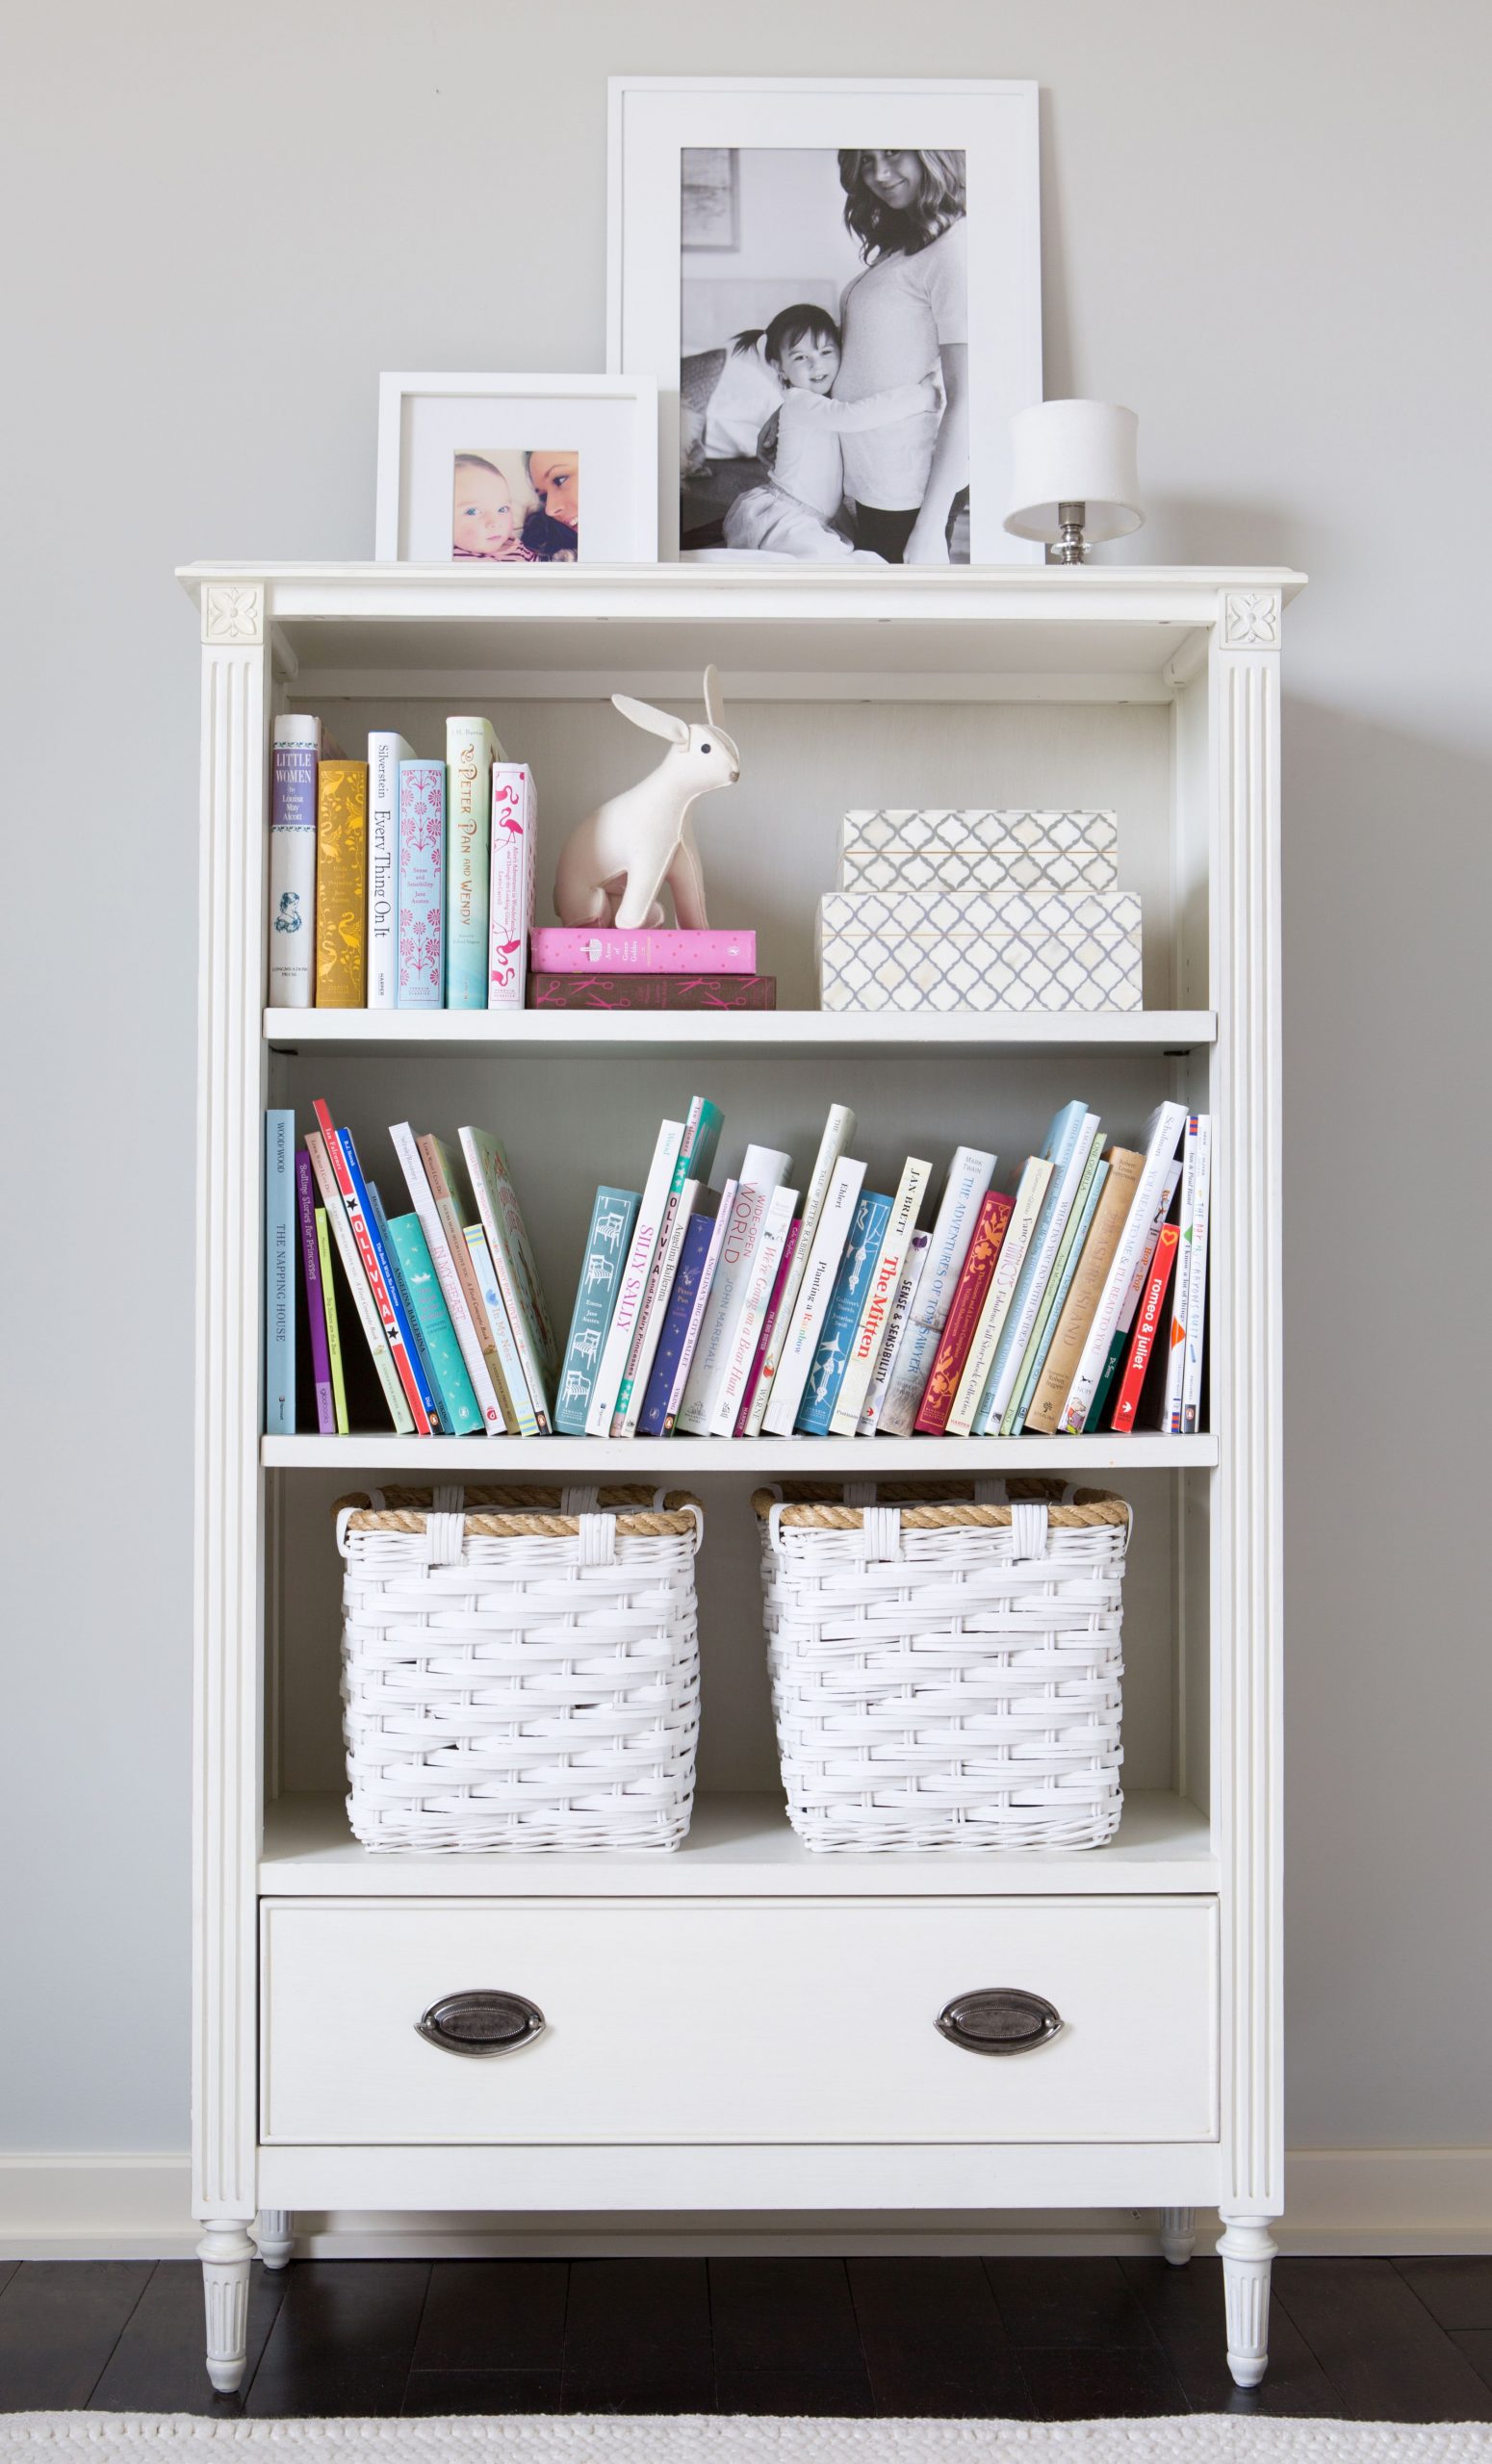 Simple Pretty Bookshelf Styling In A Girls Room Kids Room within sizing 3366 X 5558